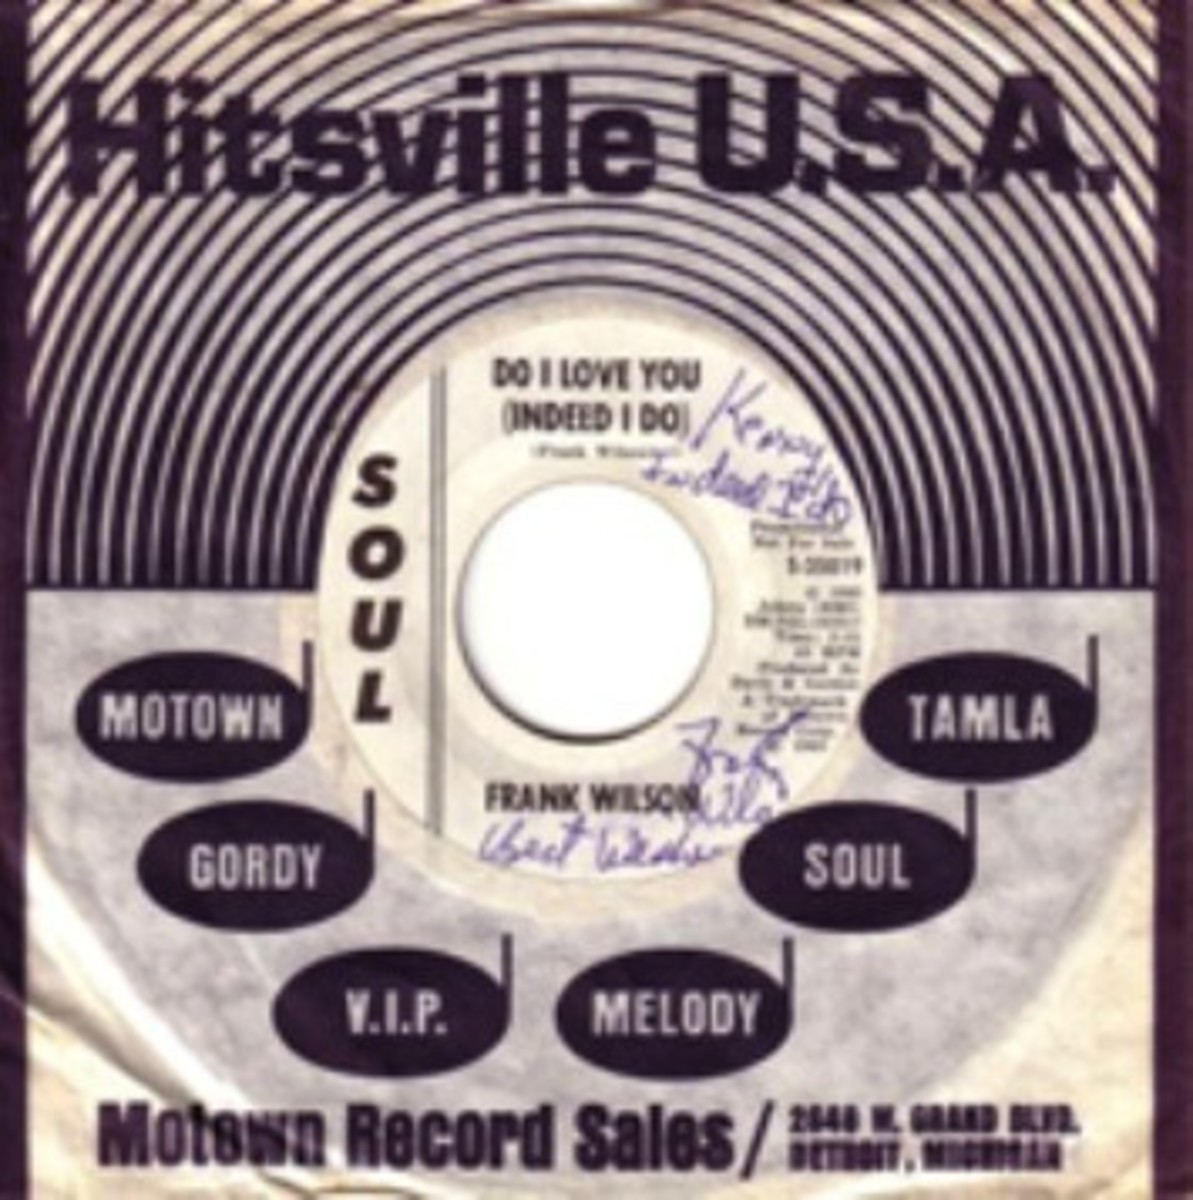 This ultra-rare Northern Soul 45 will be auctioned March 14 by UK dealer John Manship.